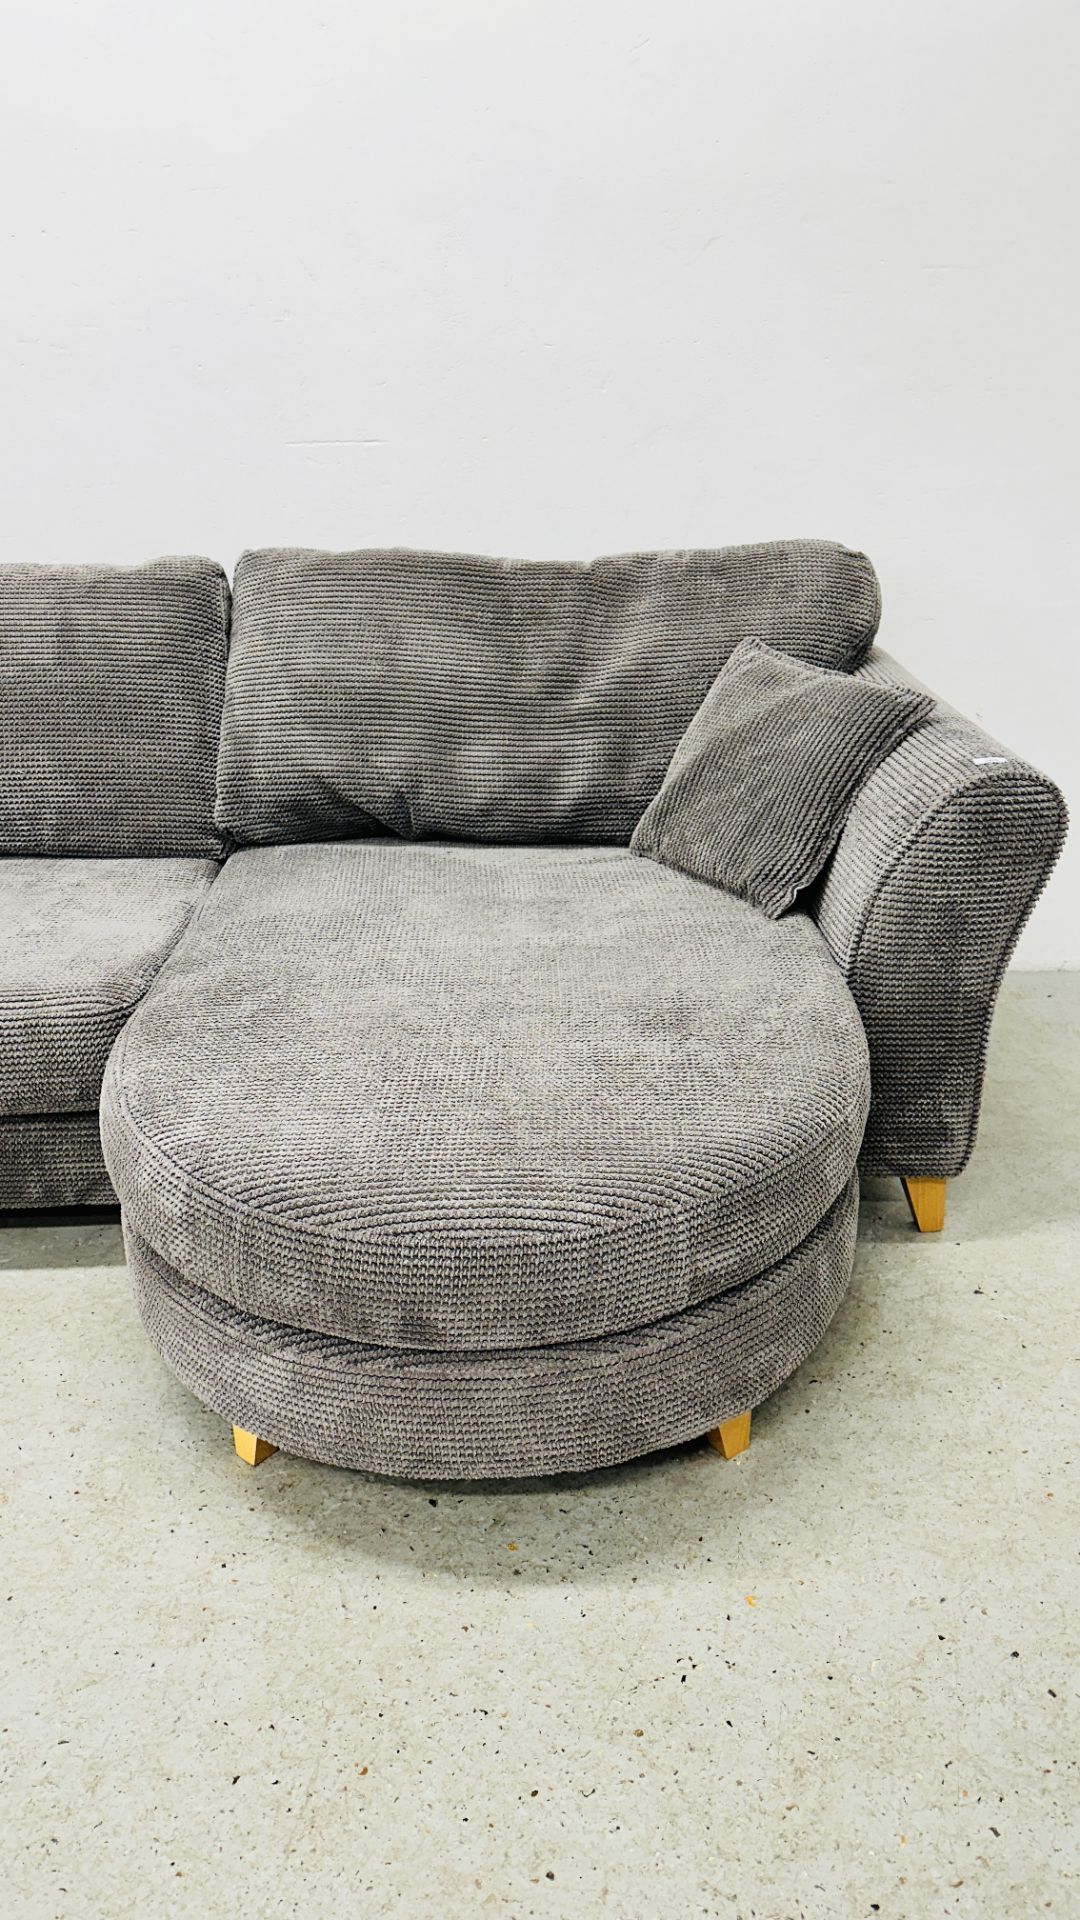 GOOD QUALITY DFS CORNER SOFA UPHOLSTERED IN CHARCOAL GREY. - Image 9 of 10